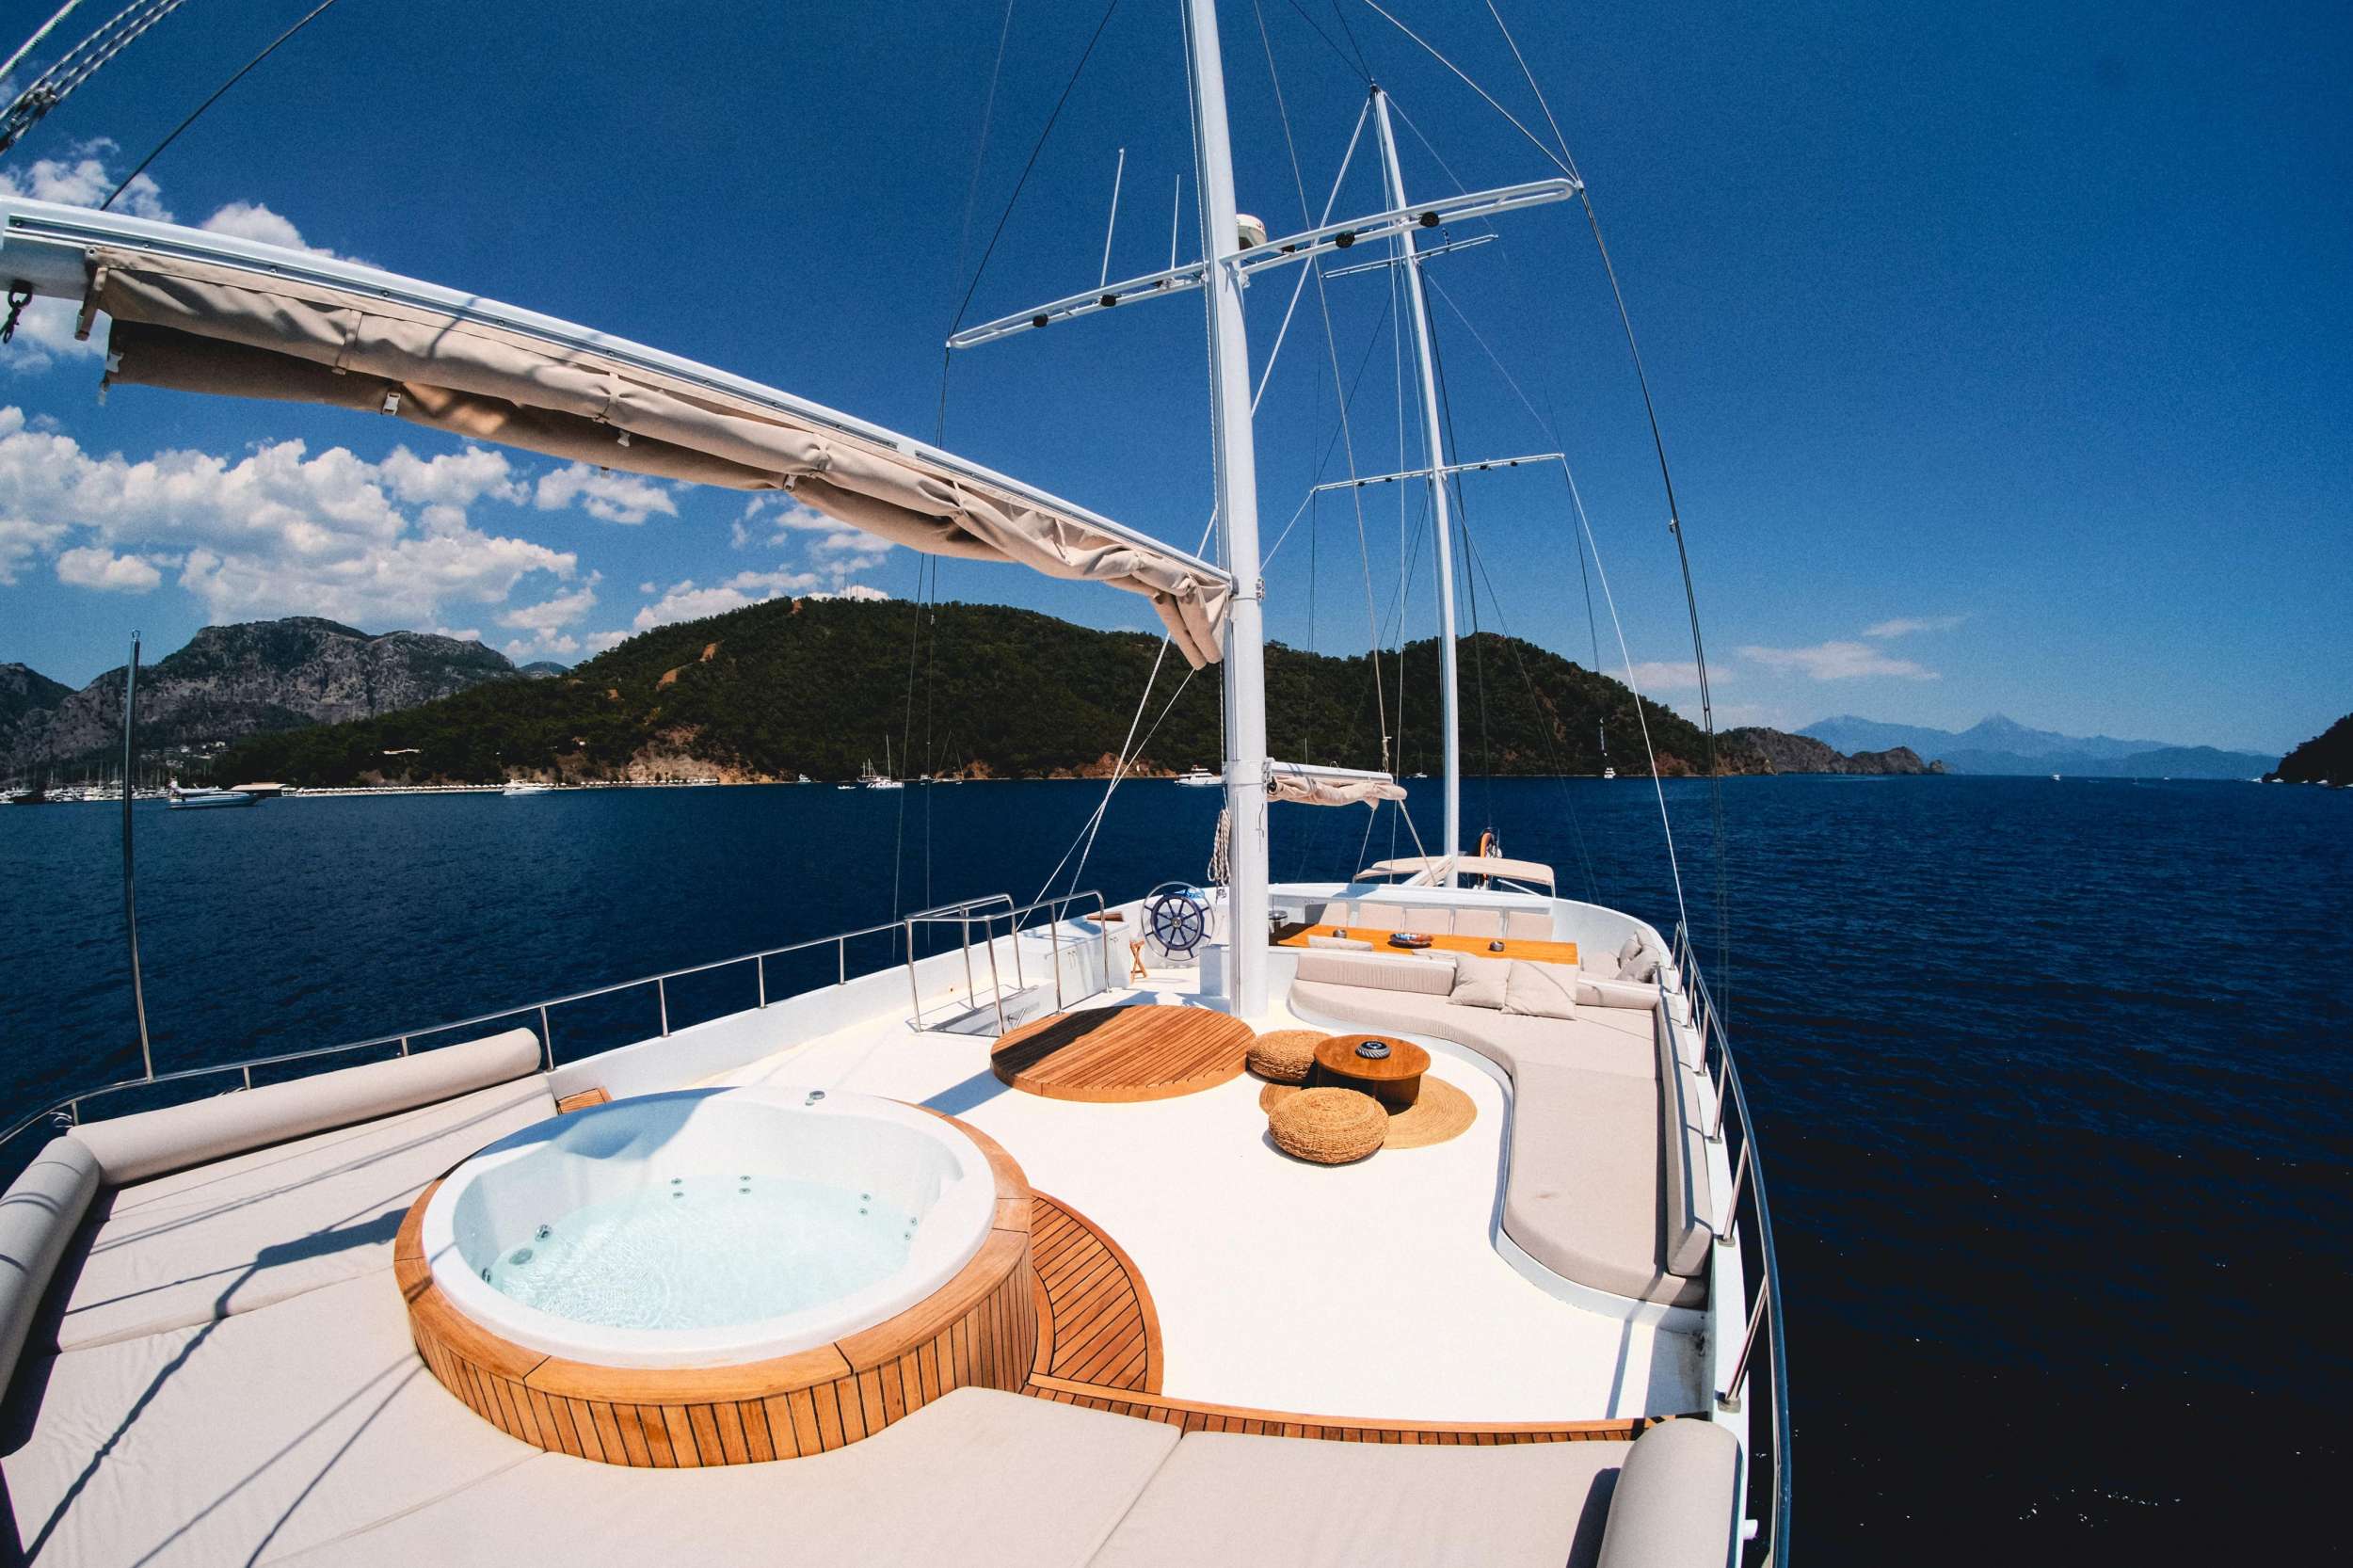 ESCAPE - Yacht Charter Istanbul & Boat hire in Turkey 4